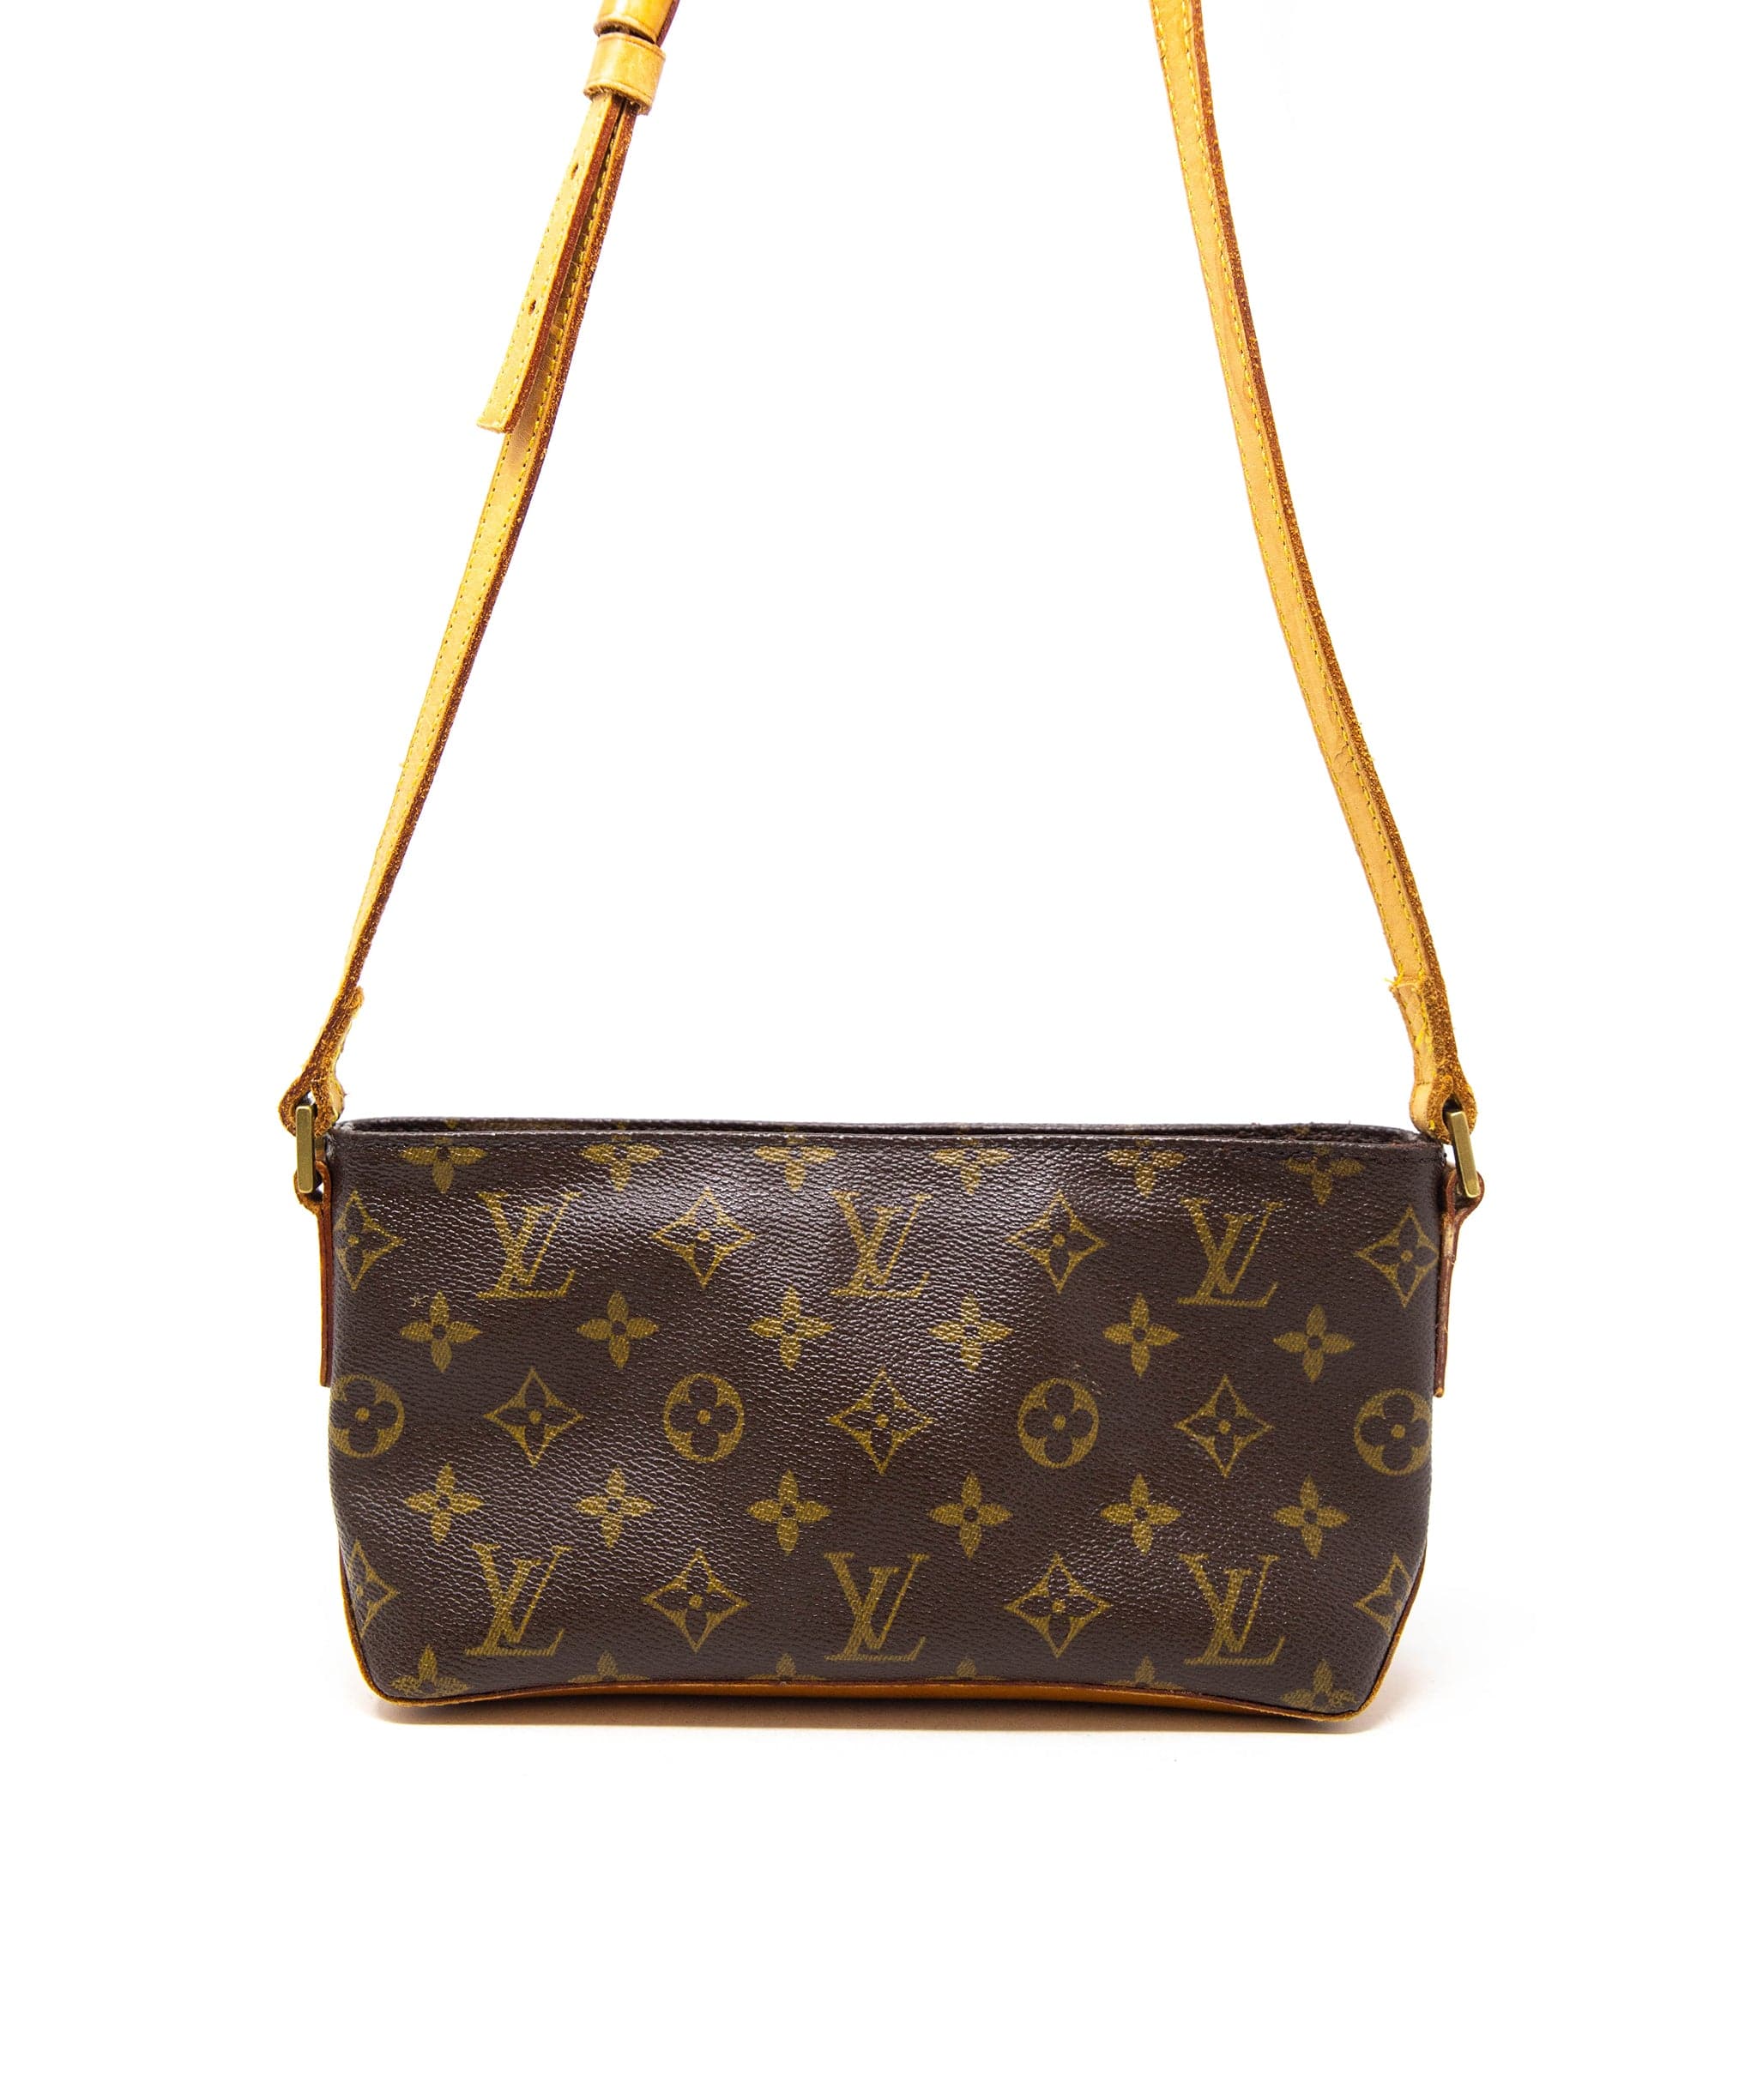 Authentic Louis Vuitton Trotter Crossbody Bag with adjustable strap length  